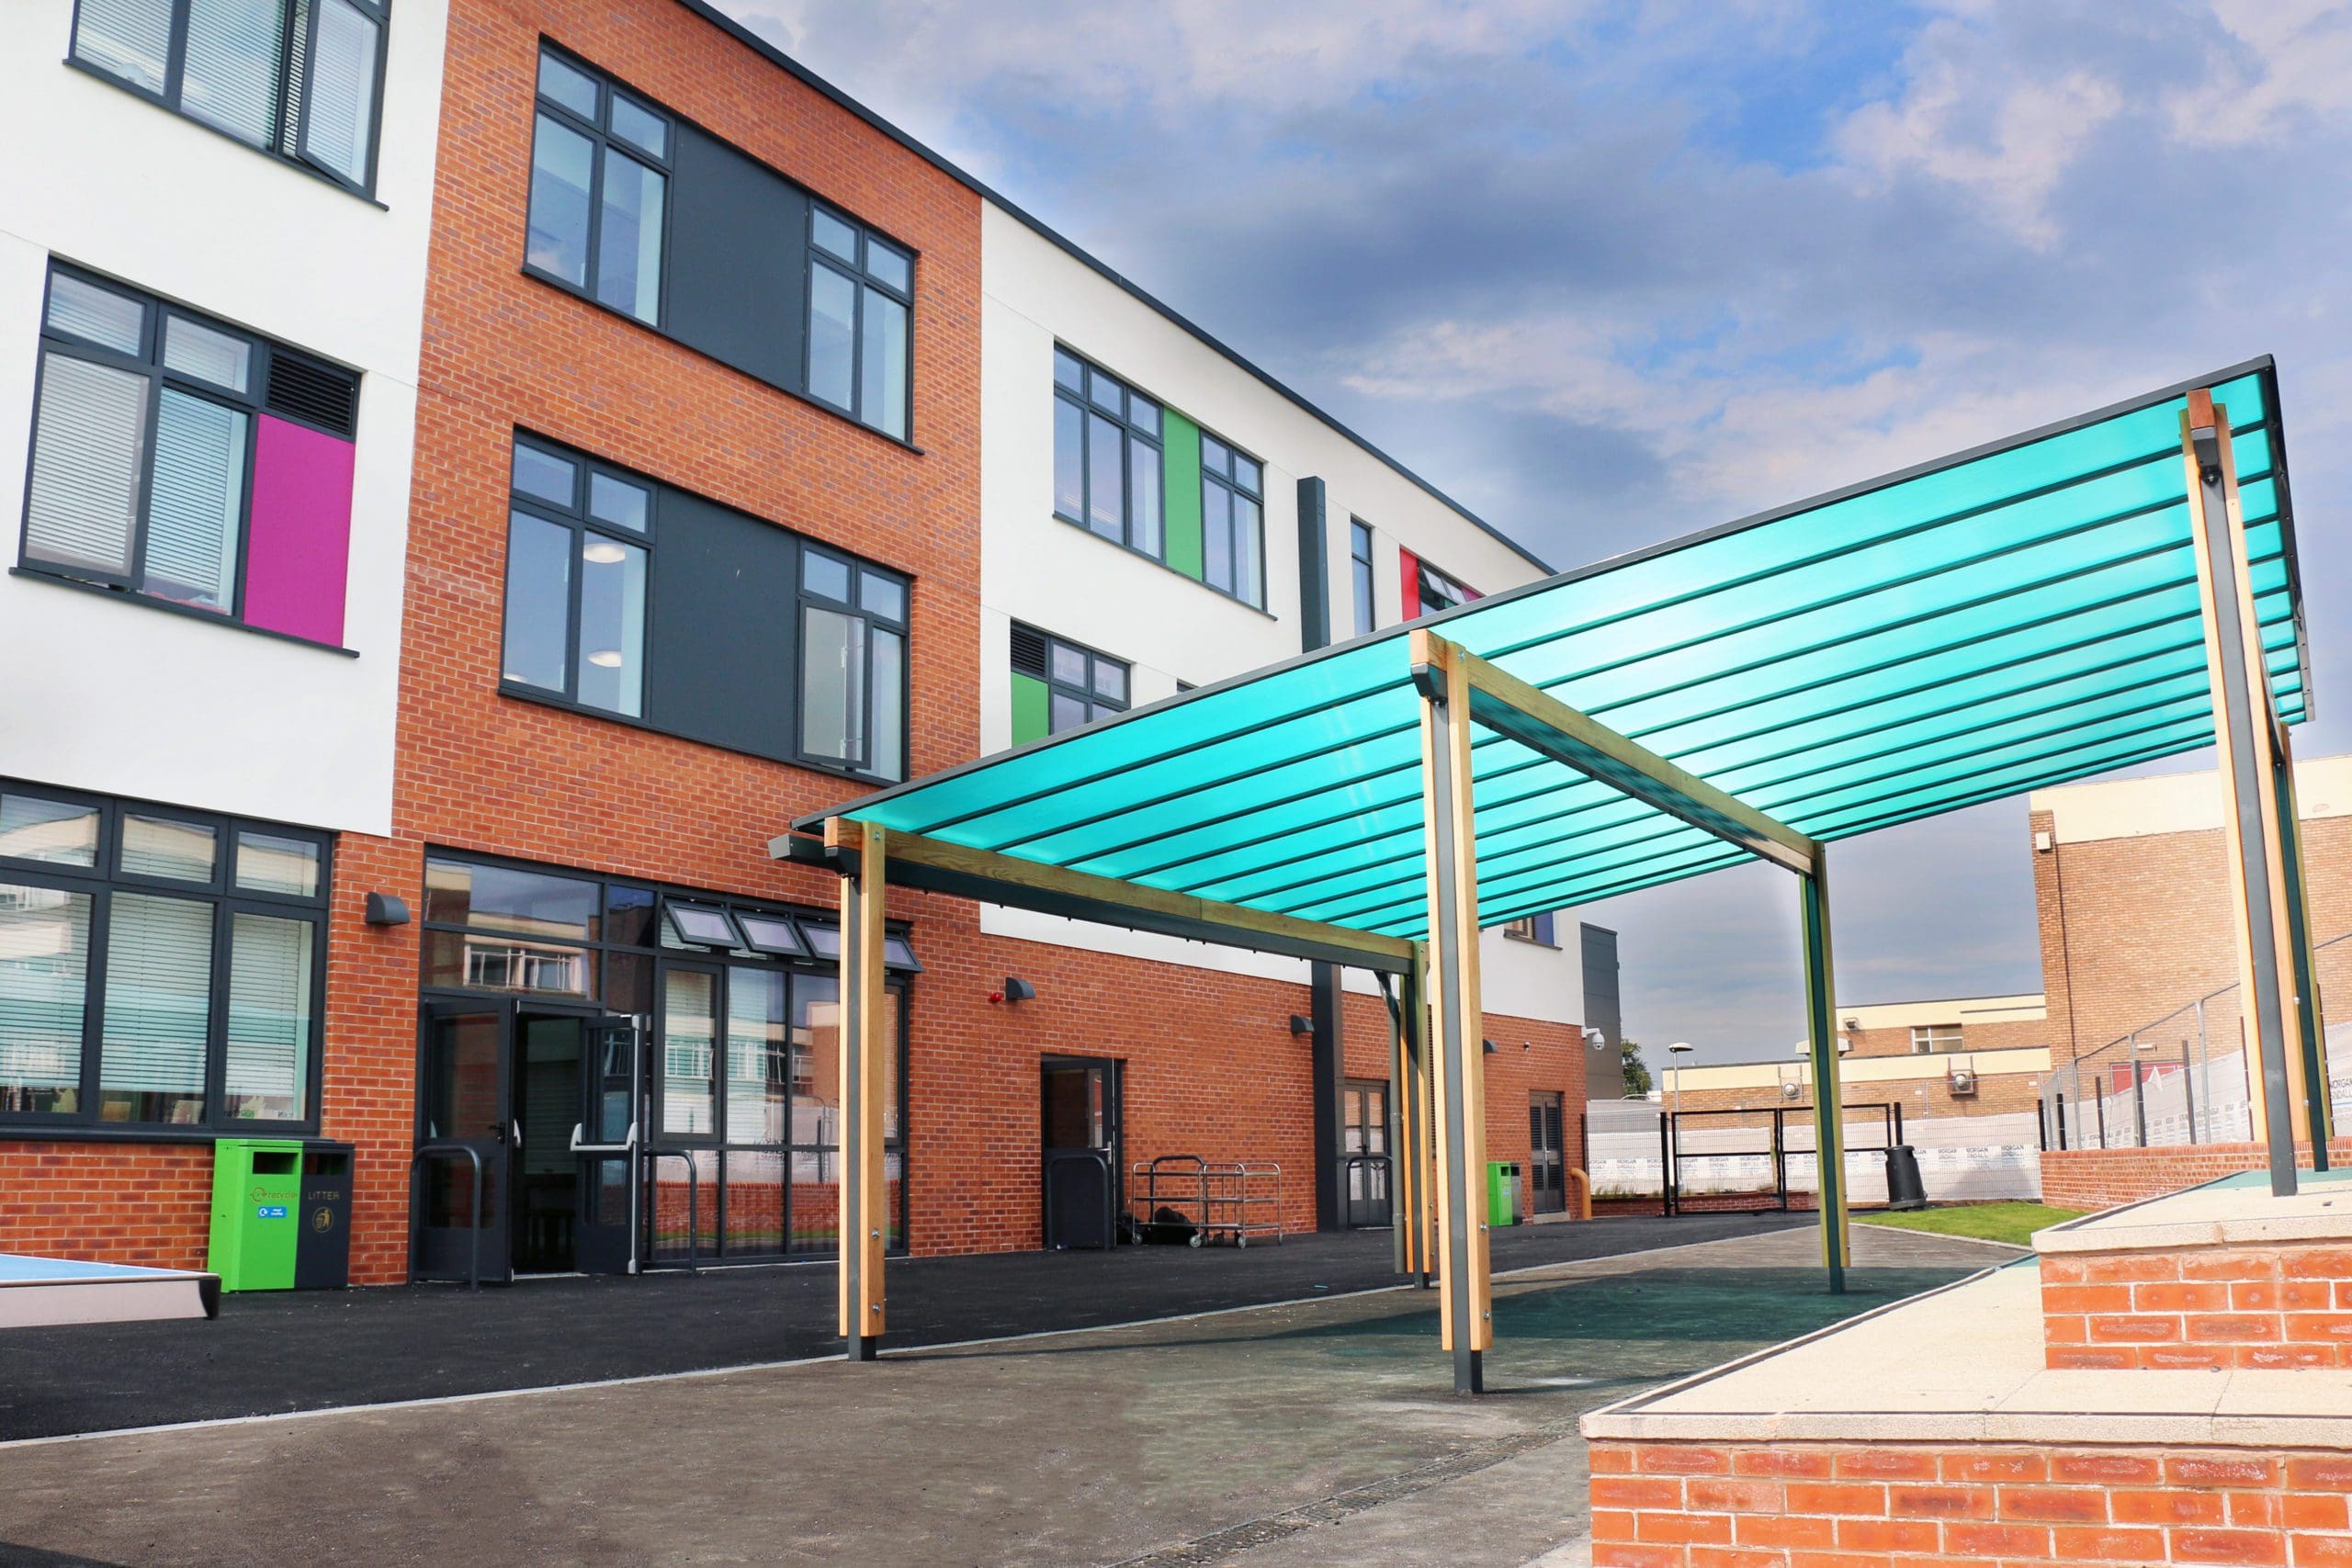 Exterior shot of school showing large wooden pergola with bright blue canopy cover